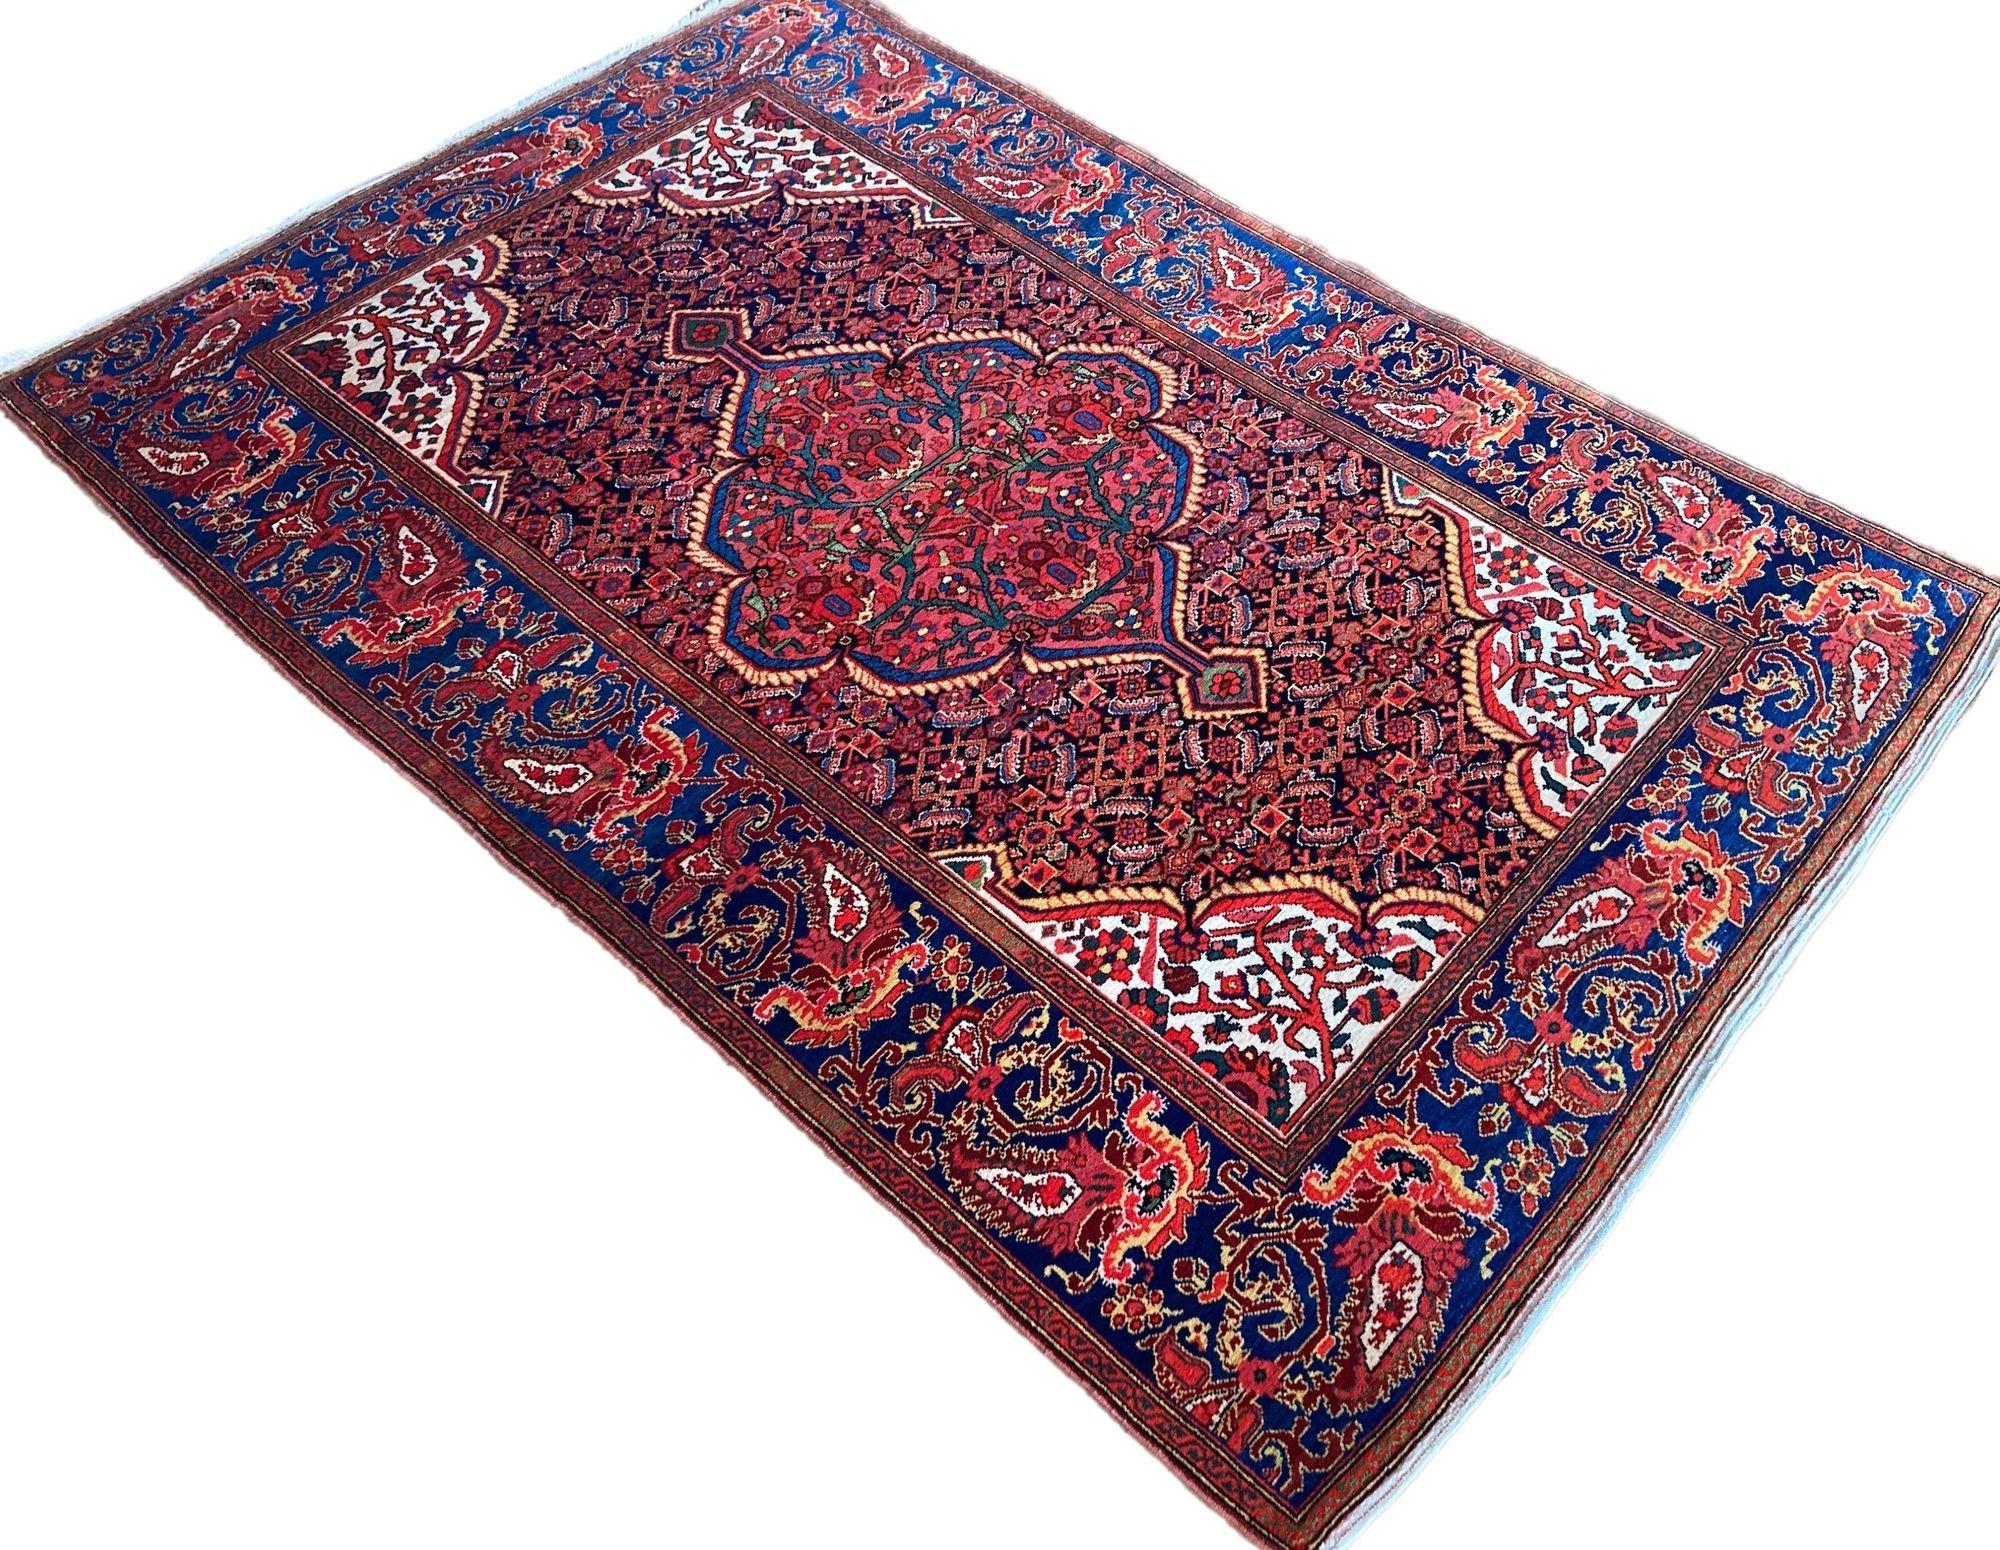 Antique Malayer Rug 2.00m X 1.35m In Good Condition For Sale In St. Albans, GB